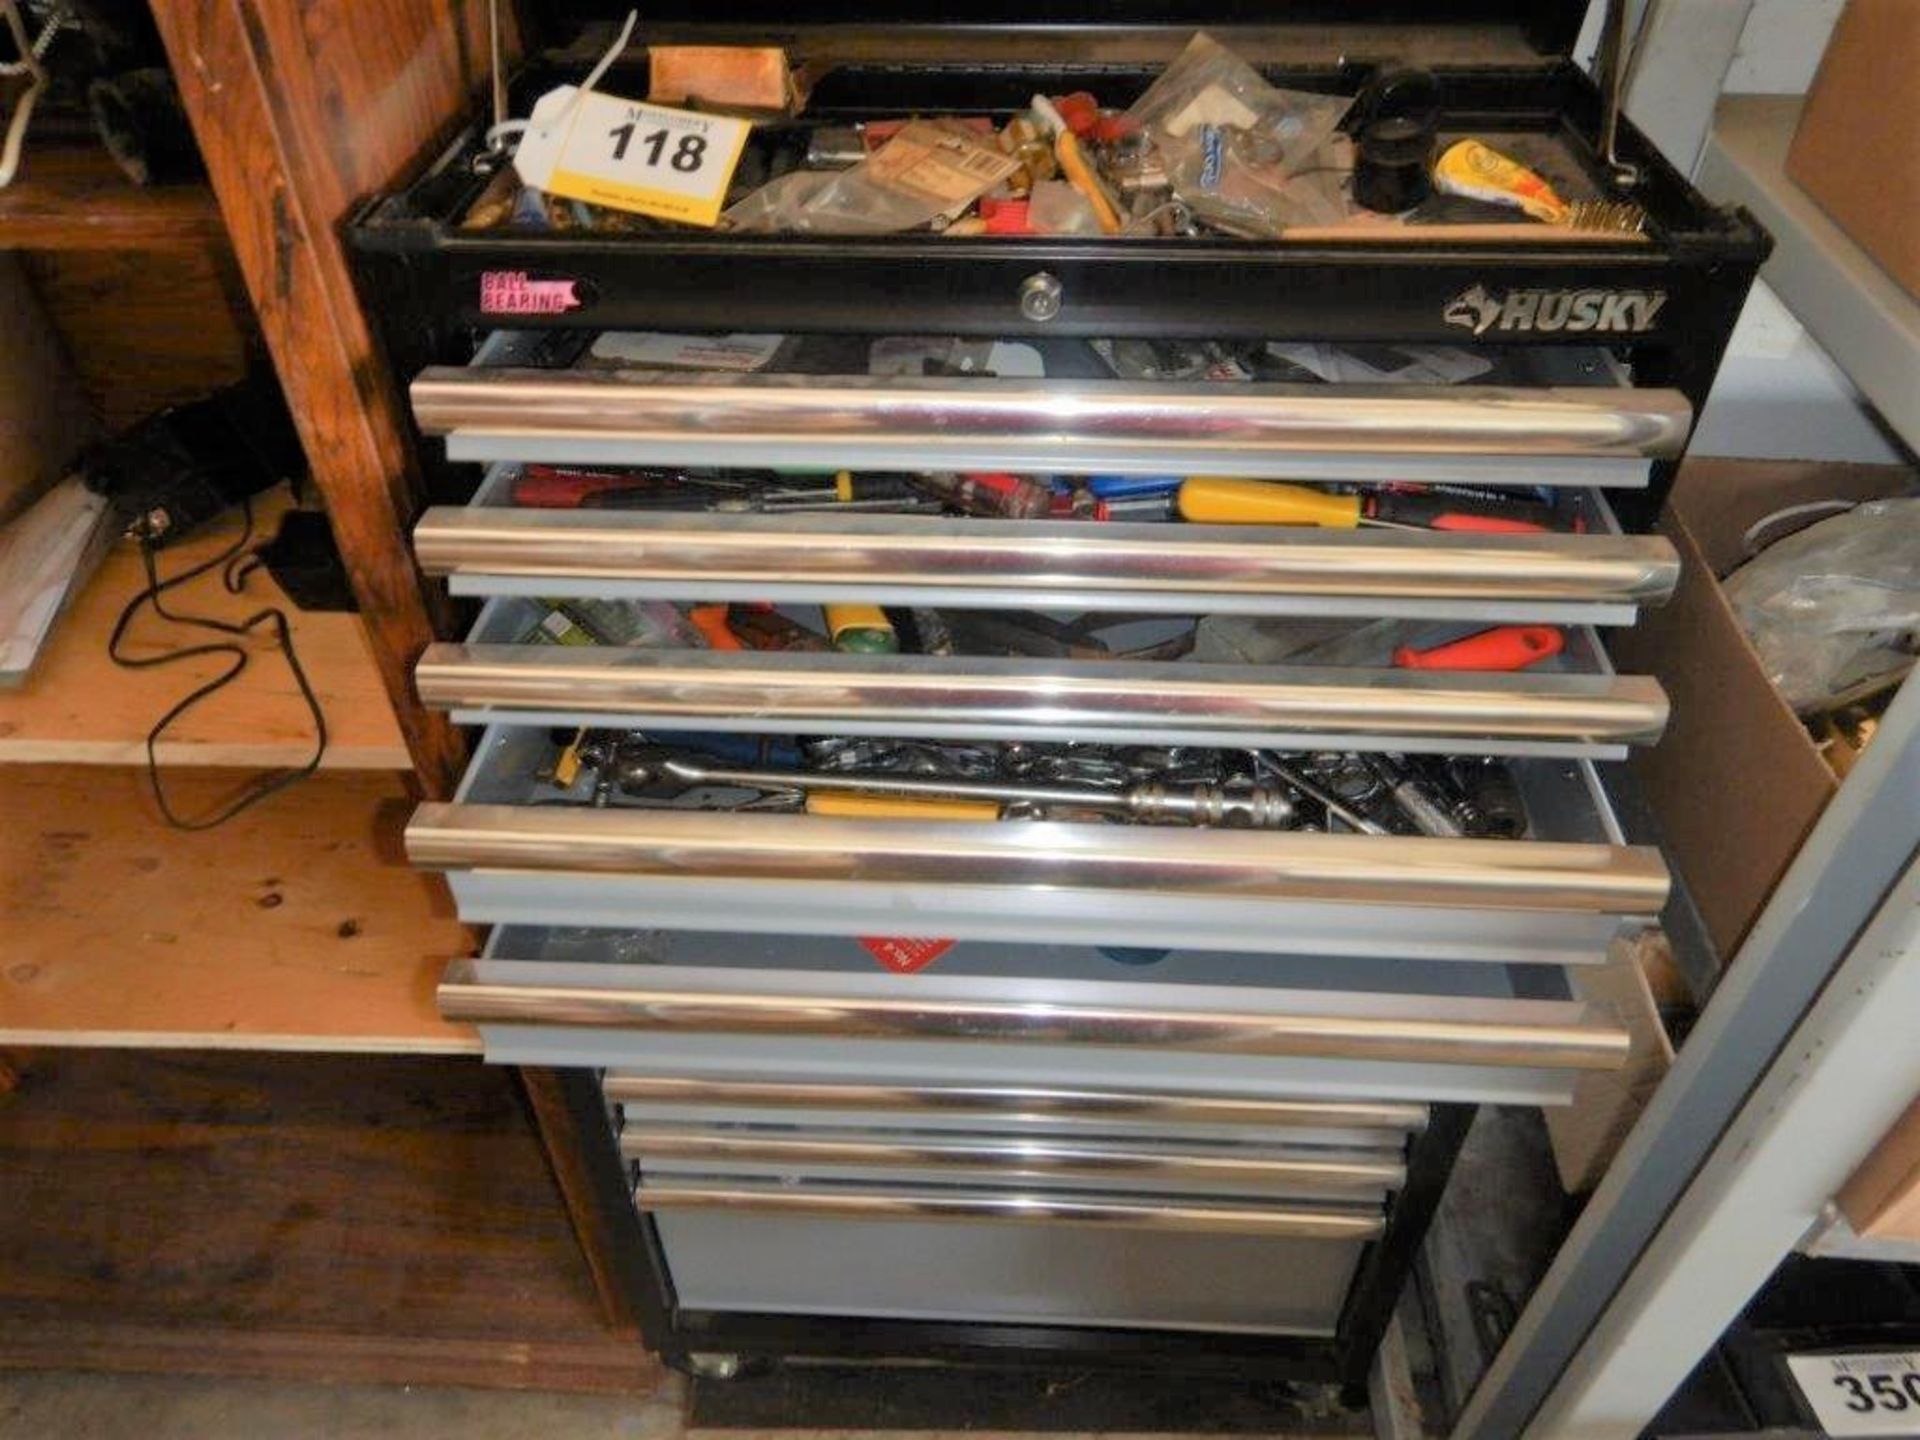 HUSKY 10 DRAWER MECHANICS TOOL CHEST & ROLL CABINET W/ MISC TOOLS & CONTENTS - Image 3 of 4